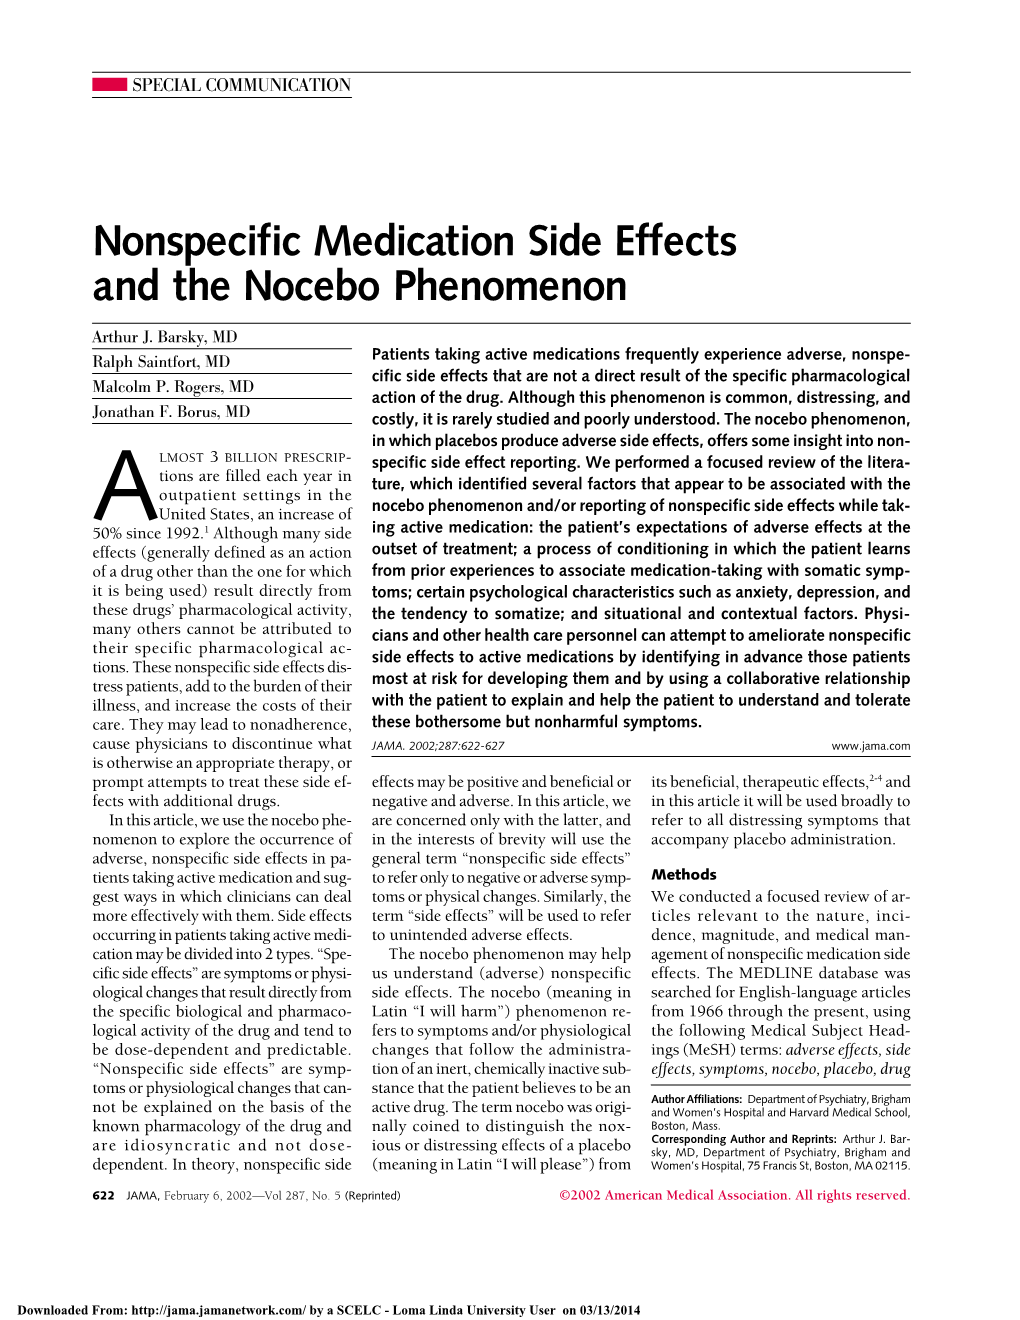 Nonspecific Medication Side Effects and the Nocebo Phenomenon